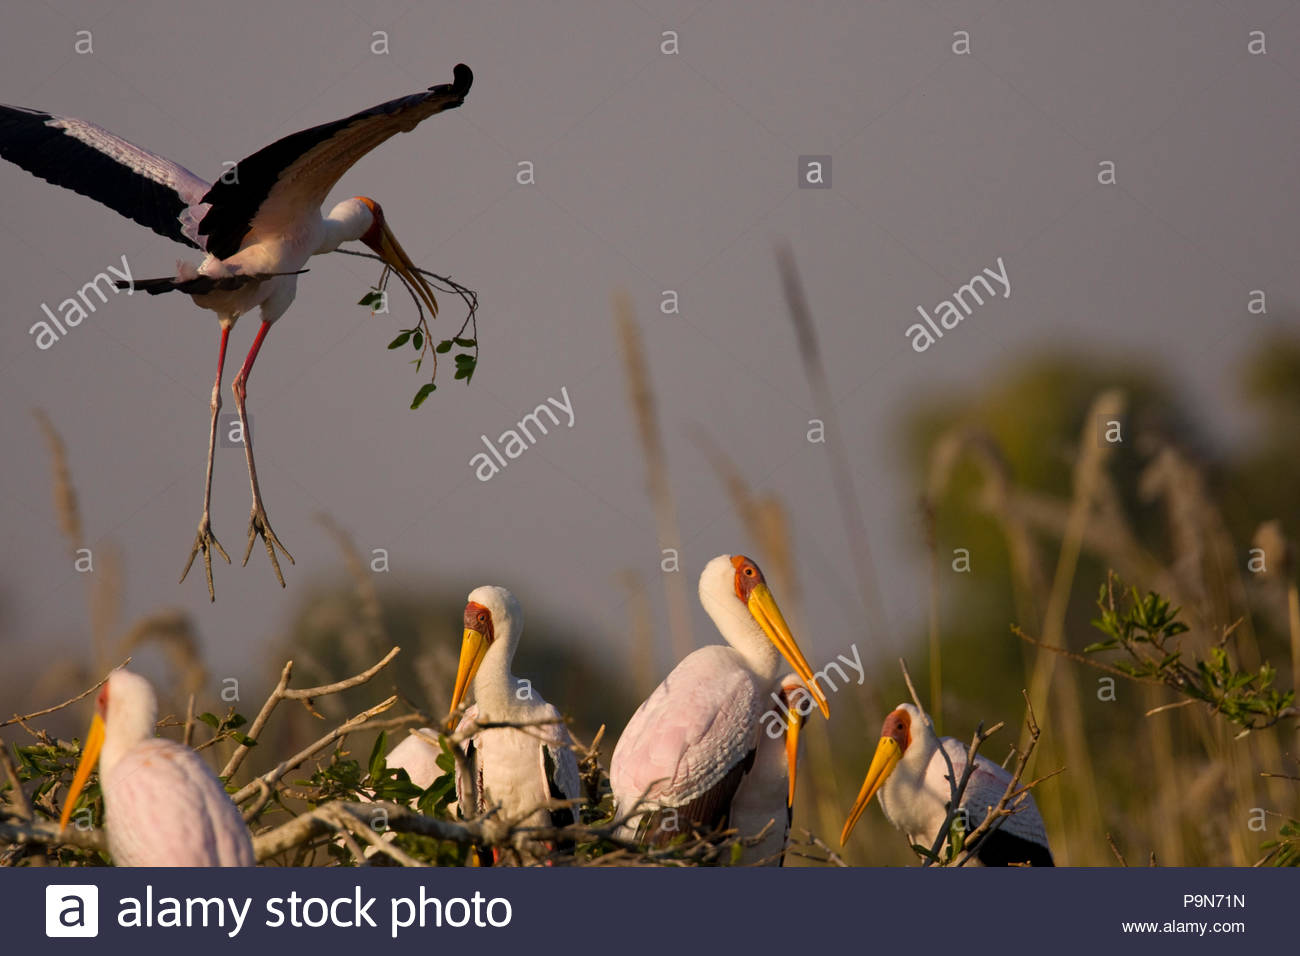 Yellow-billed storks, Mycteria Ibis, and nest building. Stock Photo